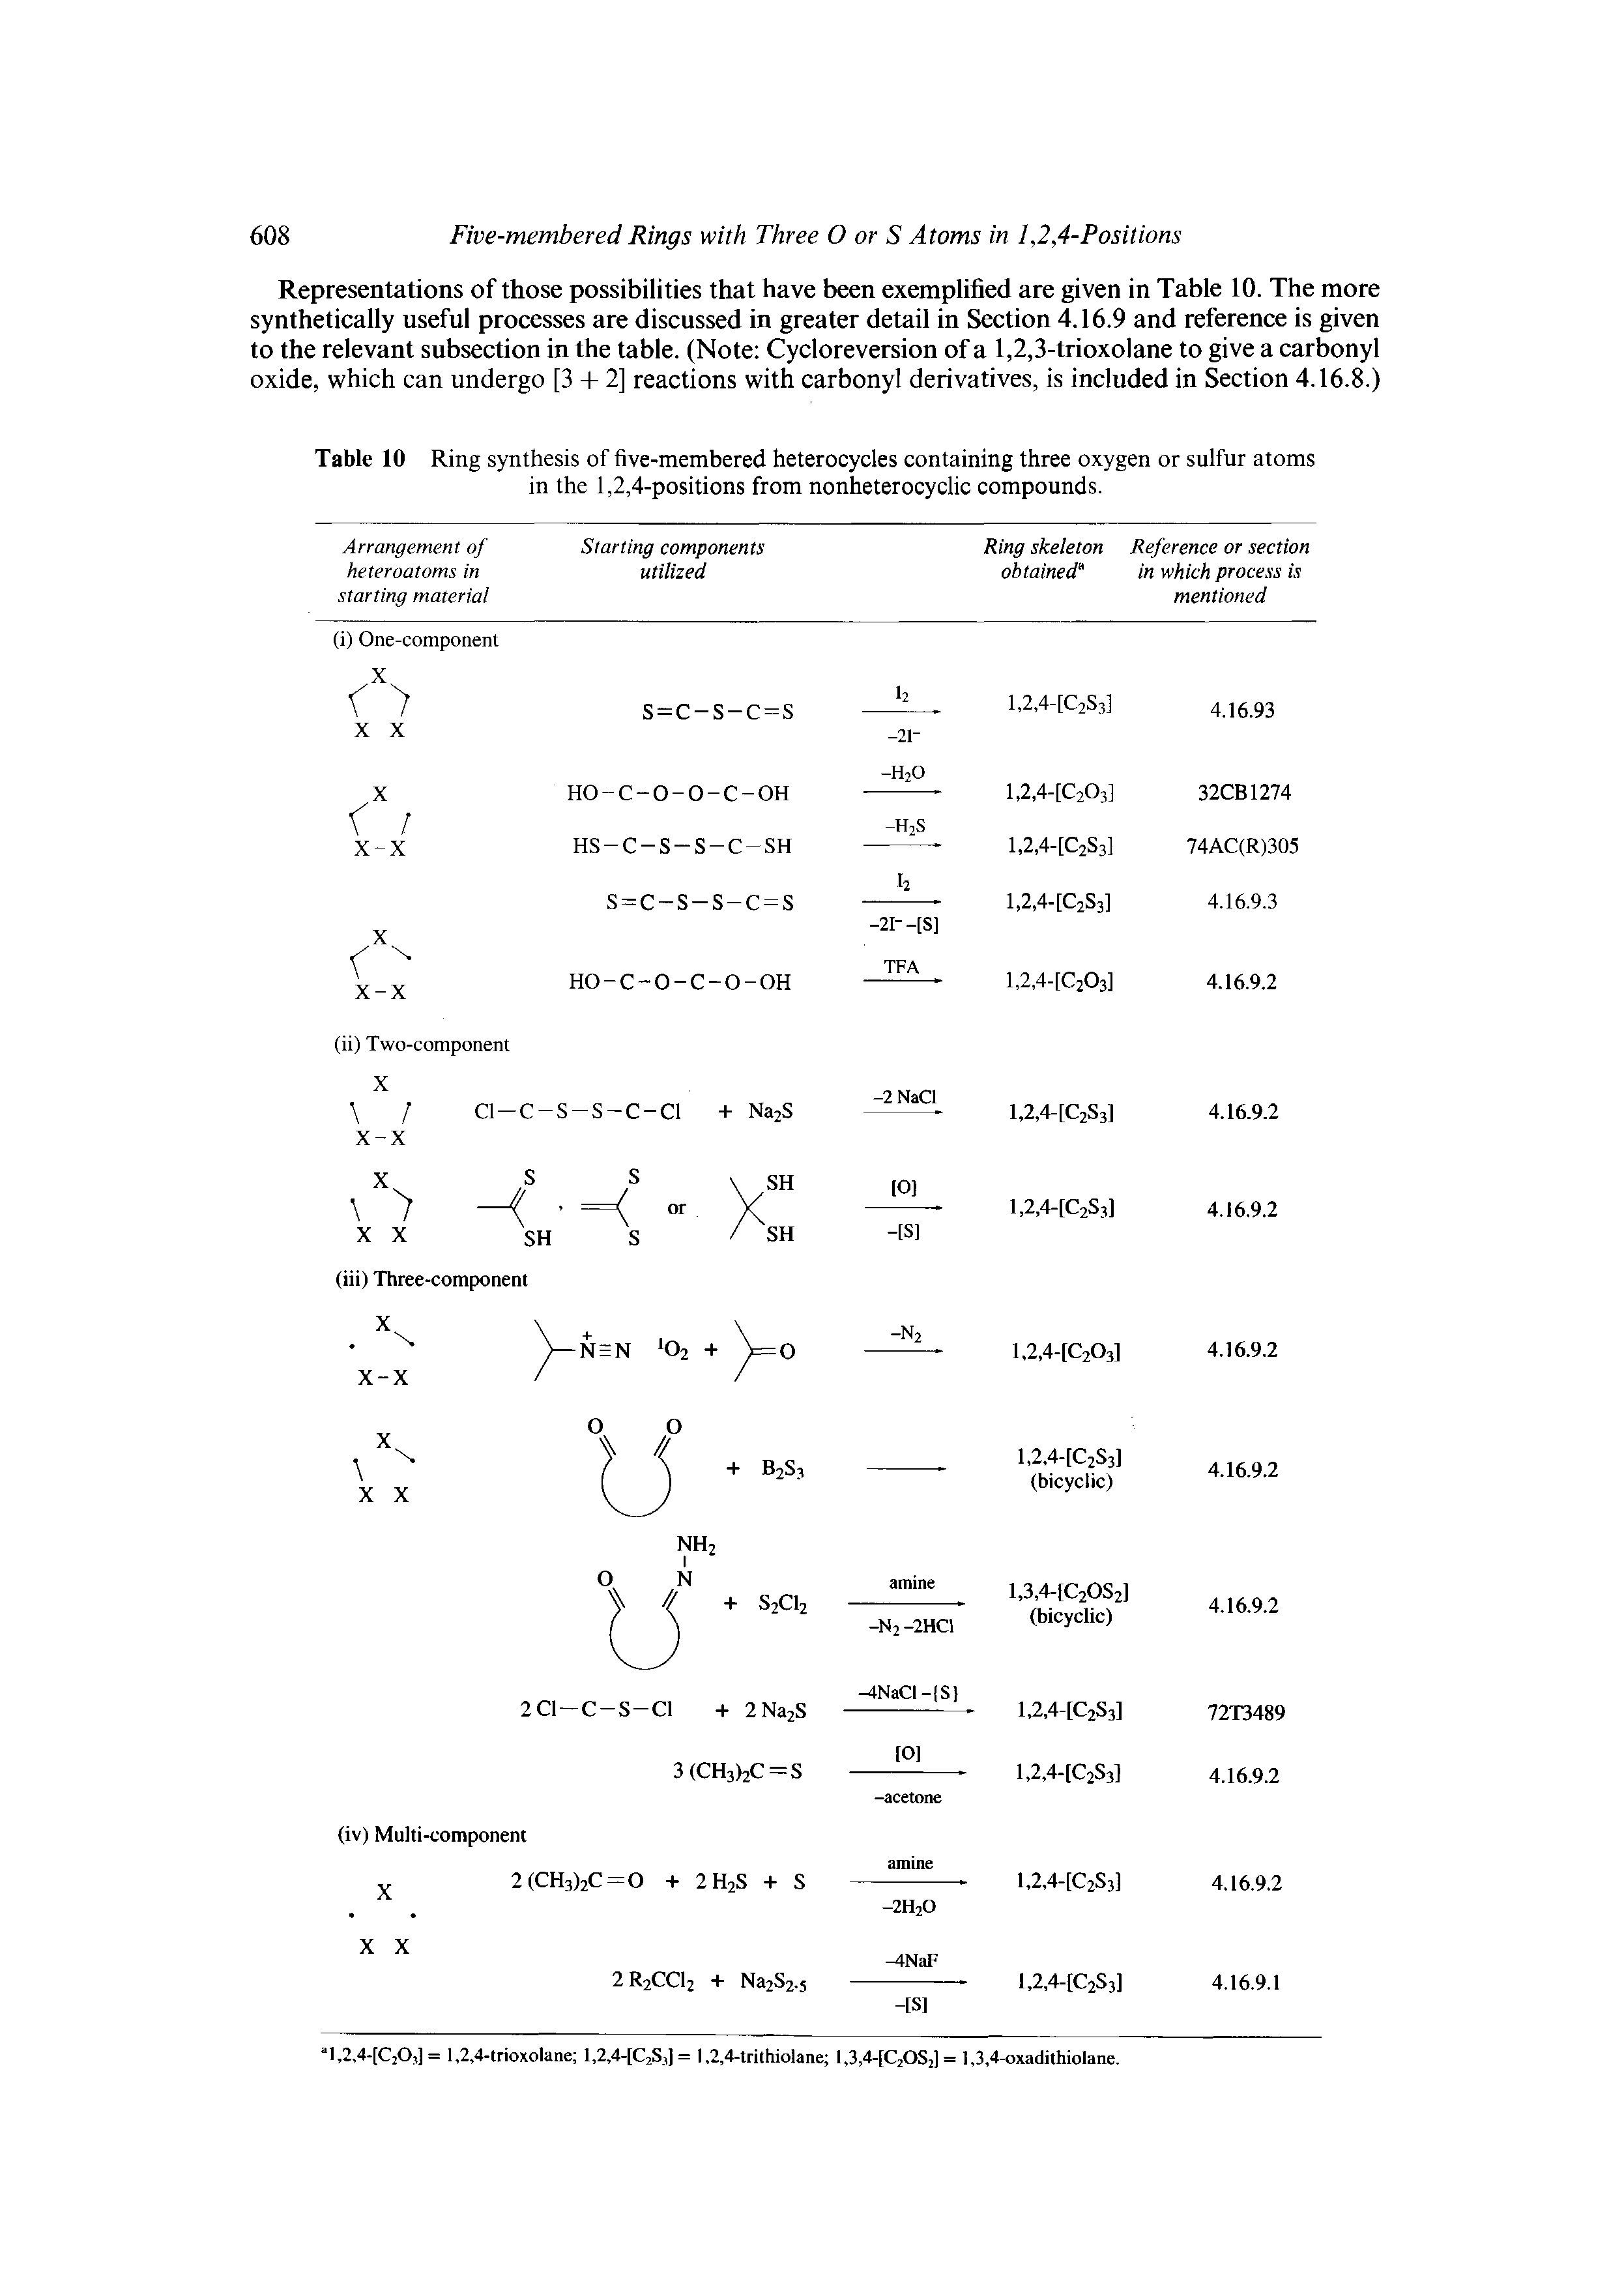 Table 10 Ring synthesis of five-membered heterocycles containing three oxygen or sulfur atoms in the 1,2,4-positions from nonheterocyclic compounds.